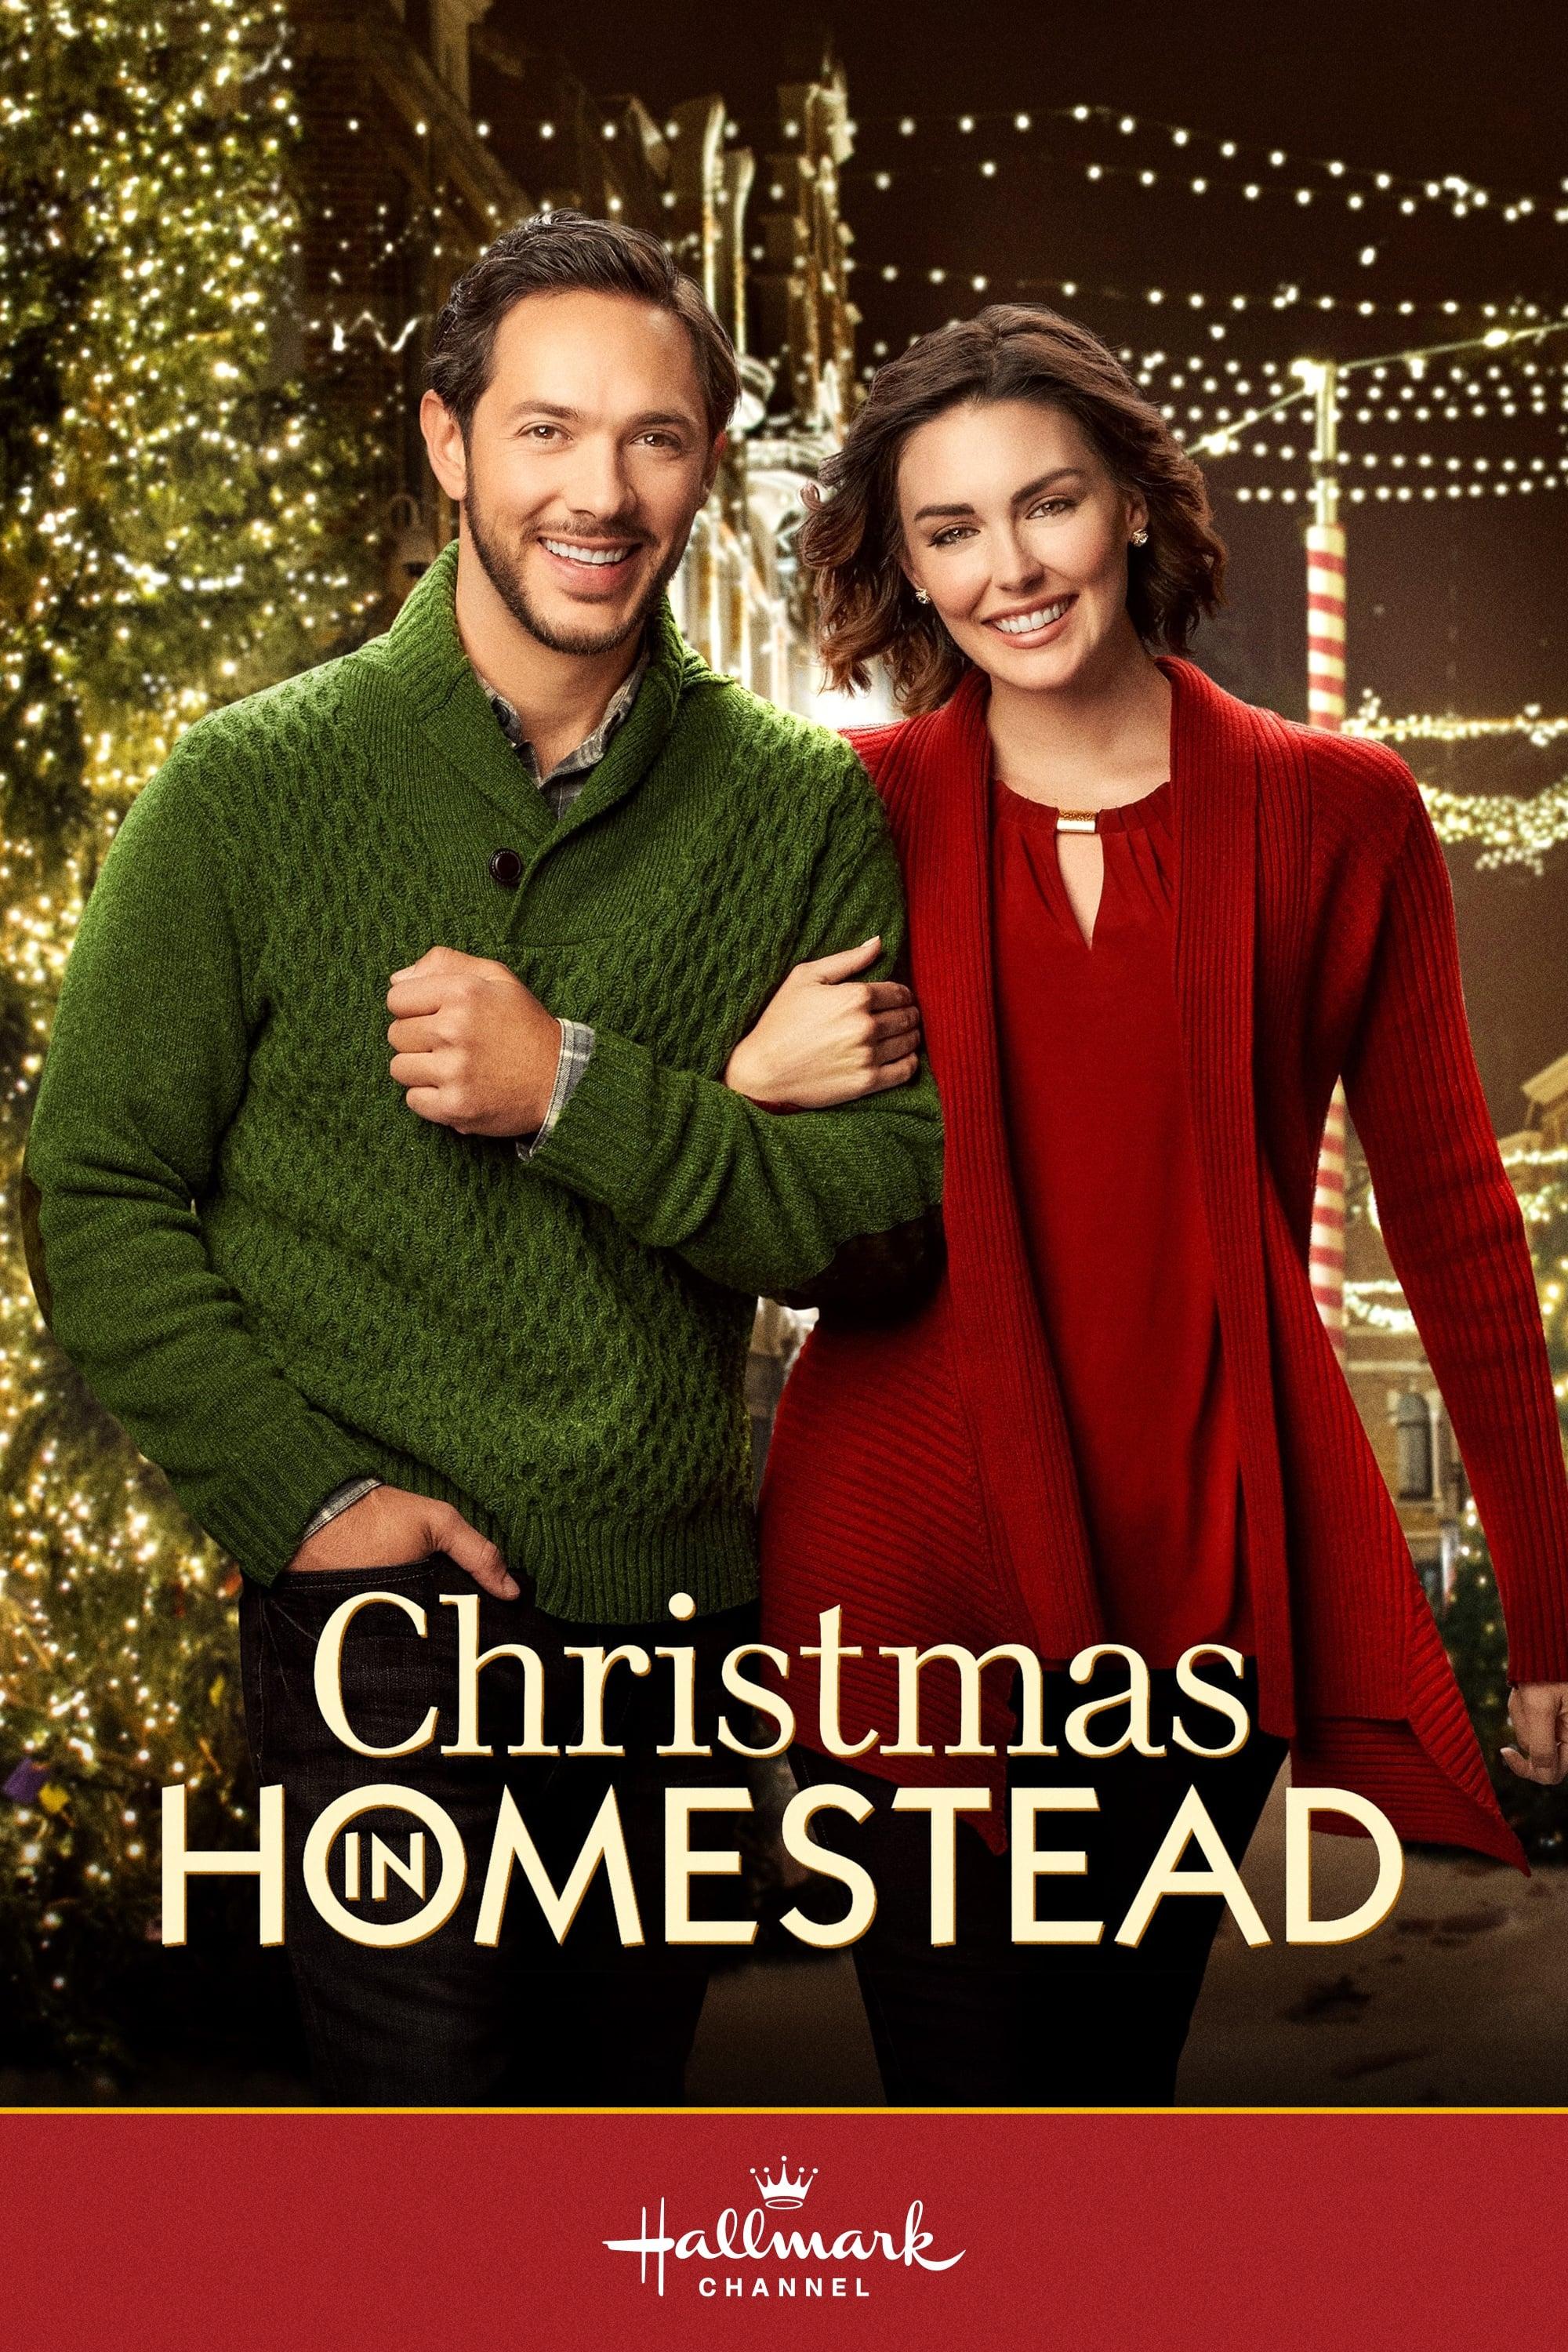 Christmas in Homestead poster